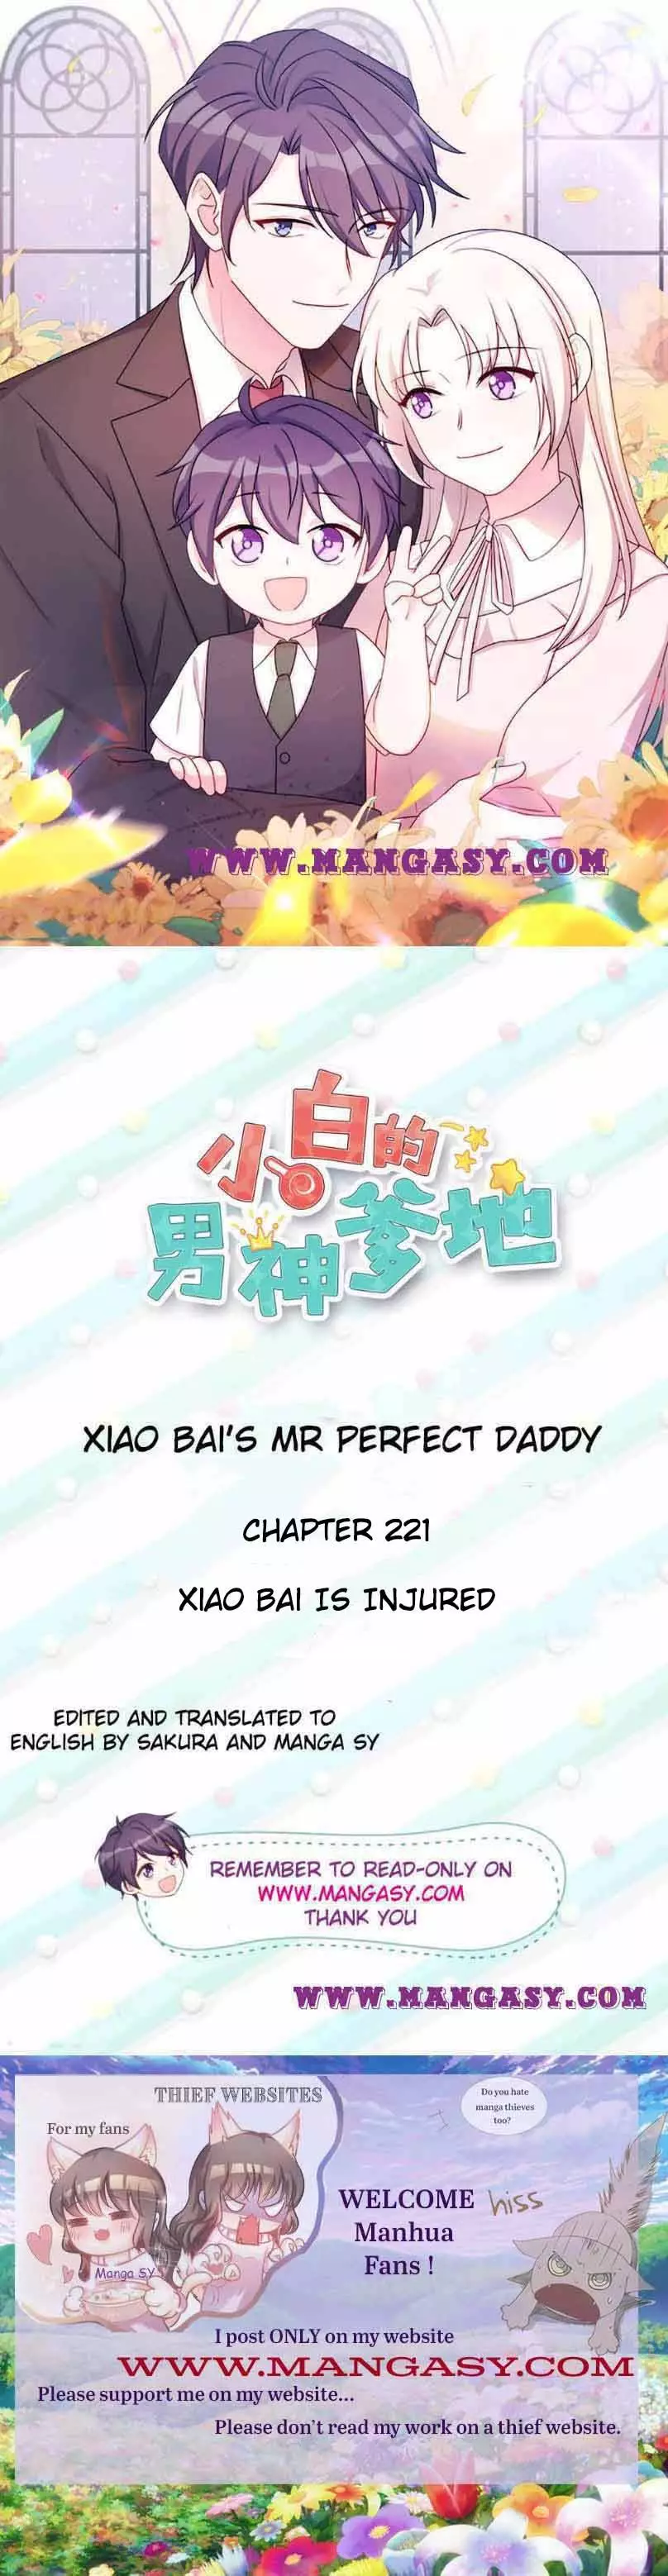 Xiao Bai’S Father Is A Wonderful Person - 221 page 1-884449f2